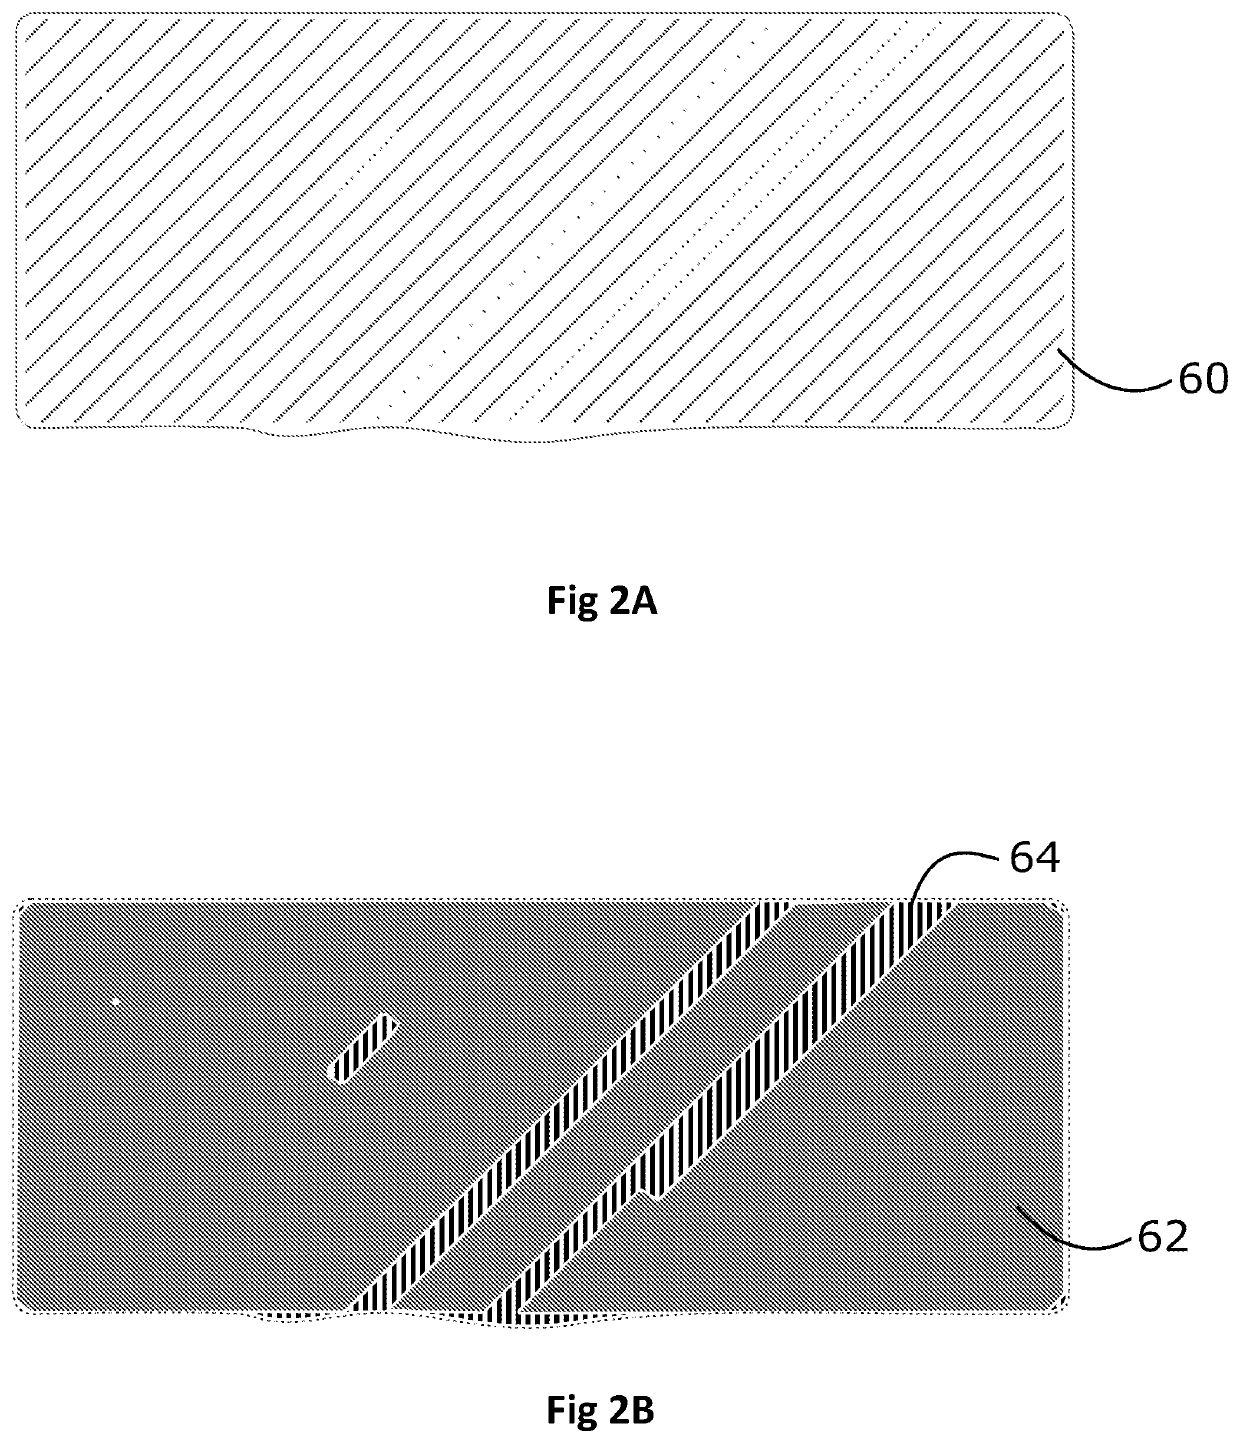 Method and System for Quality Assurance and Control of Additive Manufacturing Process